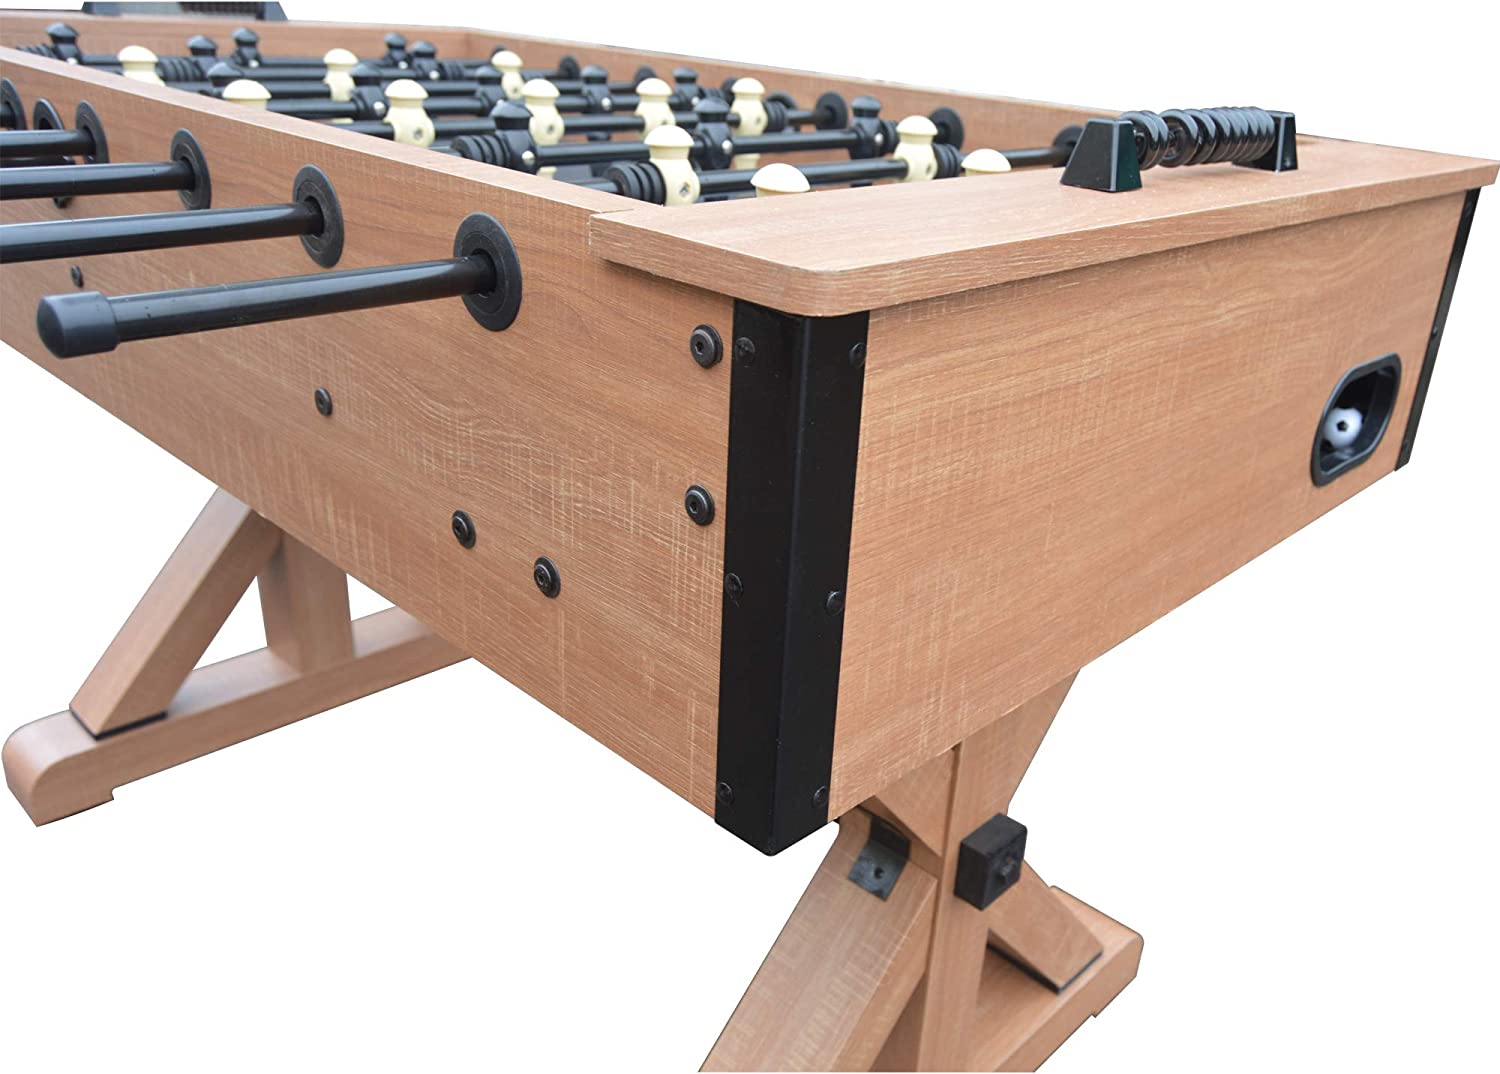 Hathaway Daulton 55-in Competition Foosball Table, Arcade Table Soccer for Game Rooms, Includes (2) 36-mm ABS Foosballs,Oak / Black,BG50351